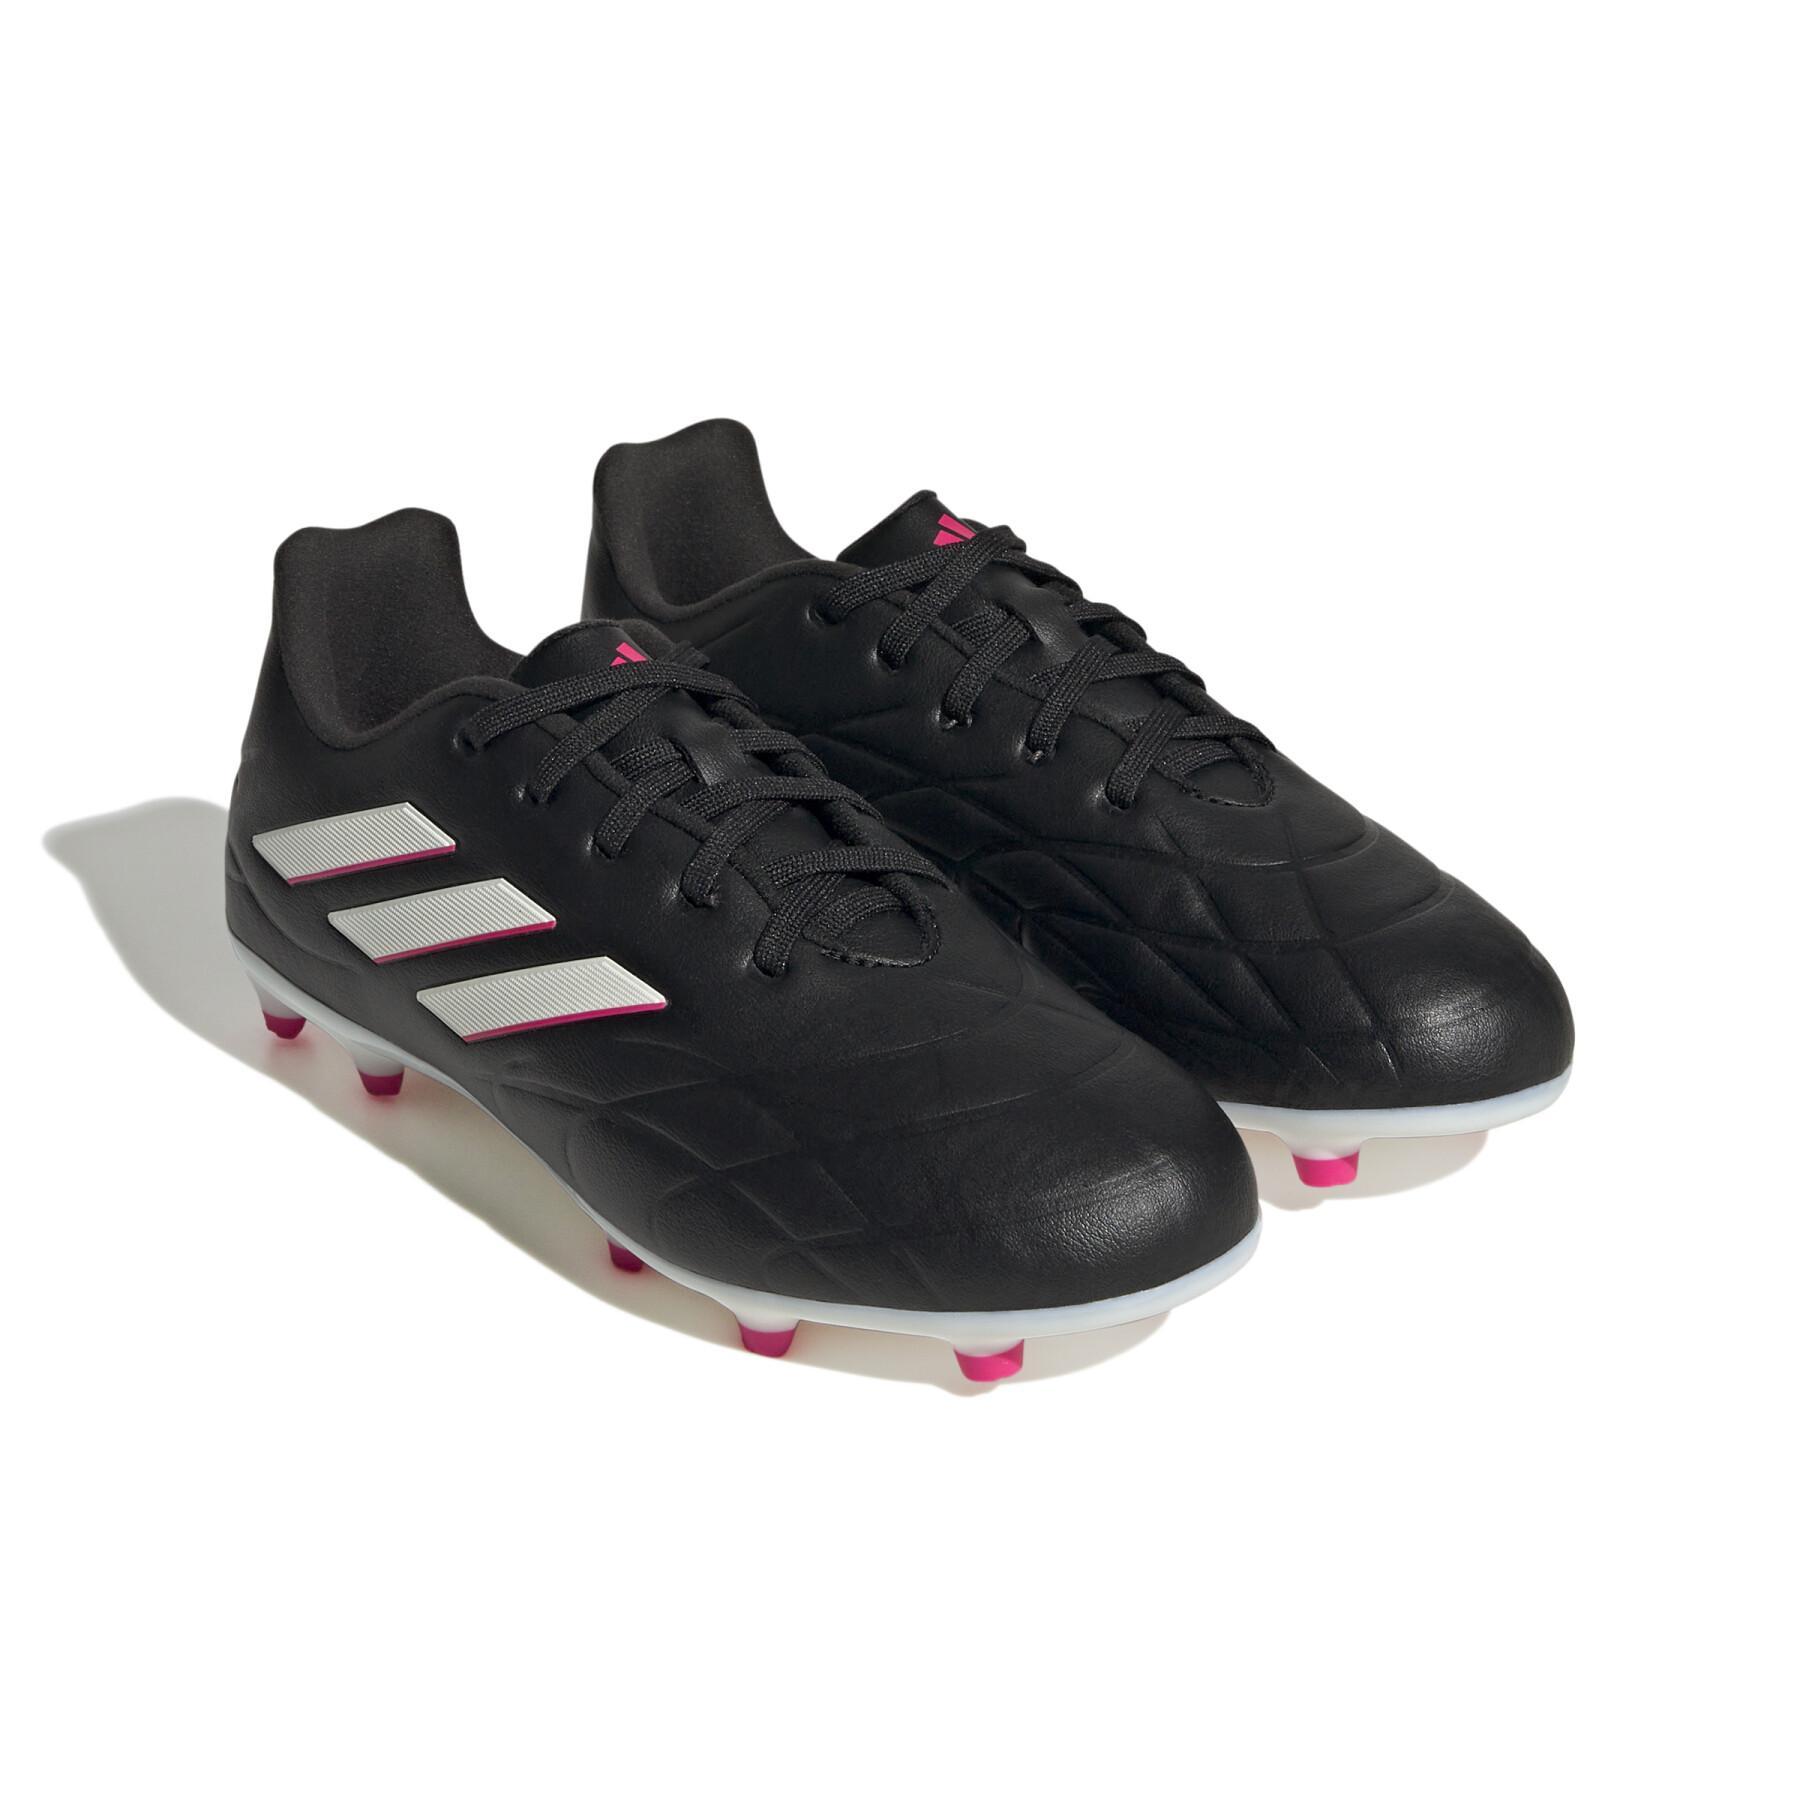 Children's Soccer cleats adidas Copa Pure.3